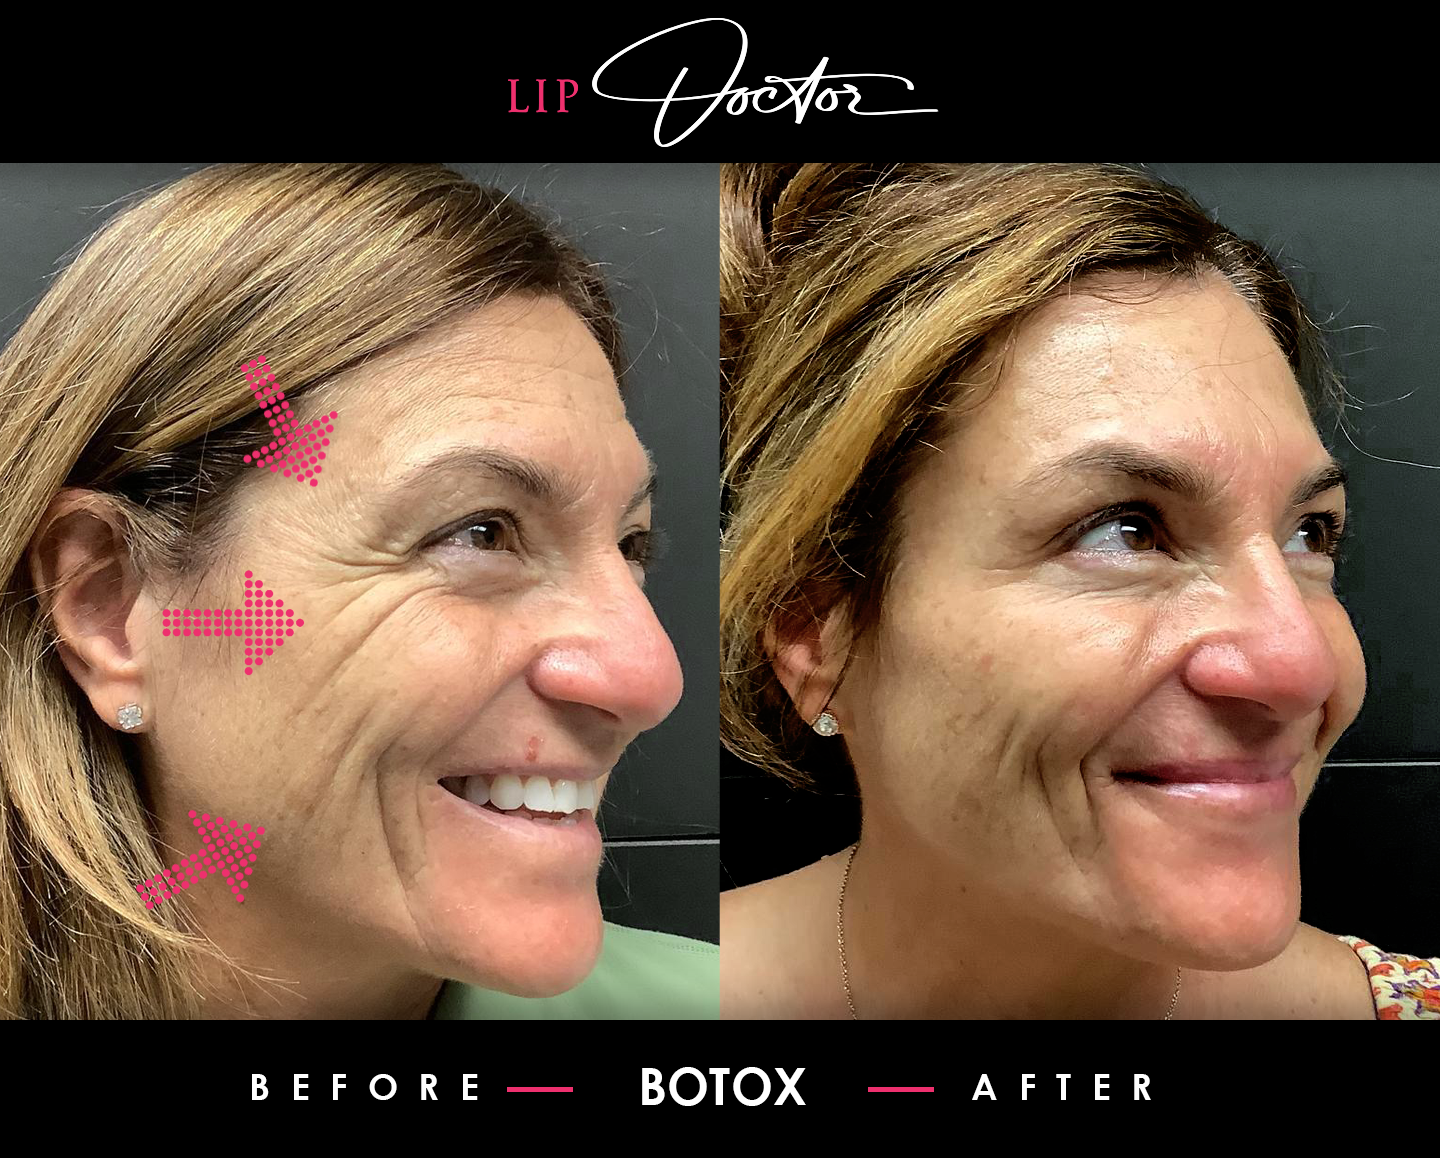  ALT Text: Before and after photo showing the effectiveness of Botox® treatments at Lip Doctor in Mississauga and Oakville, demonstrating visible reduction of forehead wrinkles and crow's feet.